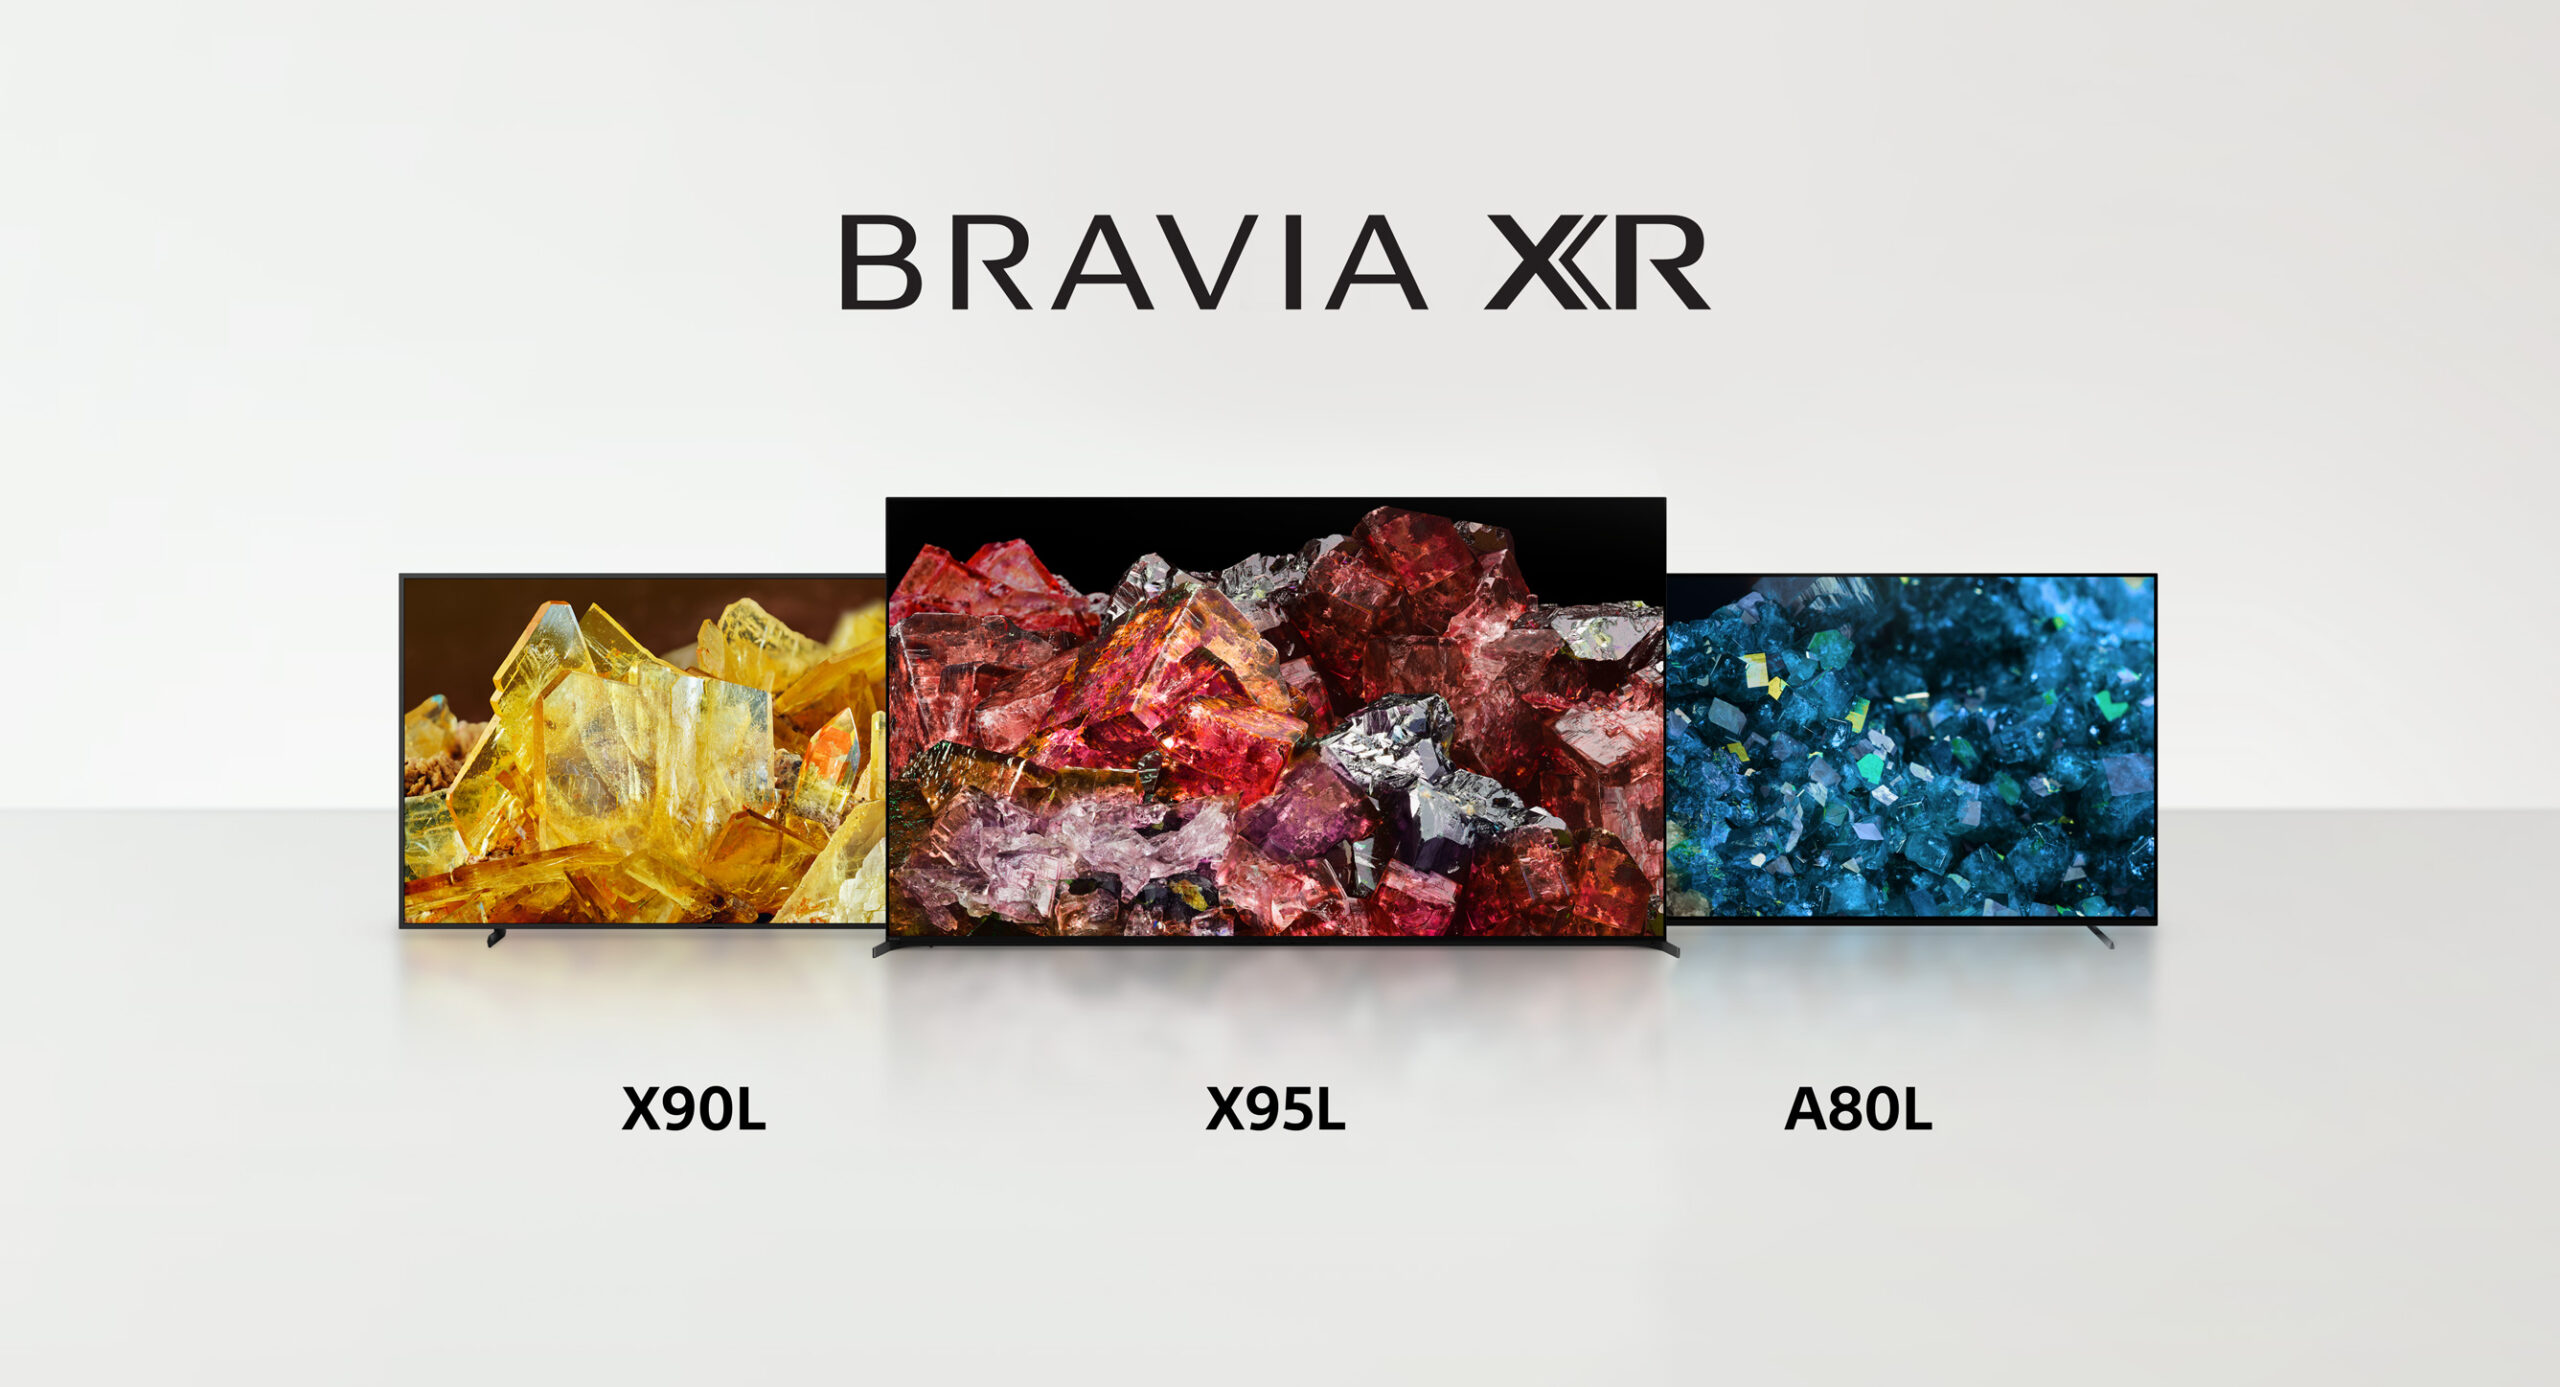 Sony Introduces 2023 BRAVIA XR TV Lineup